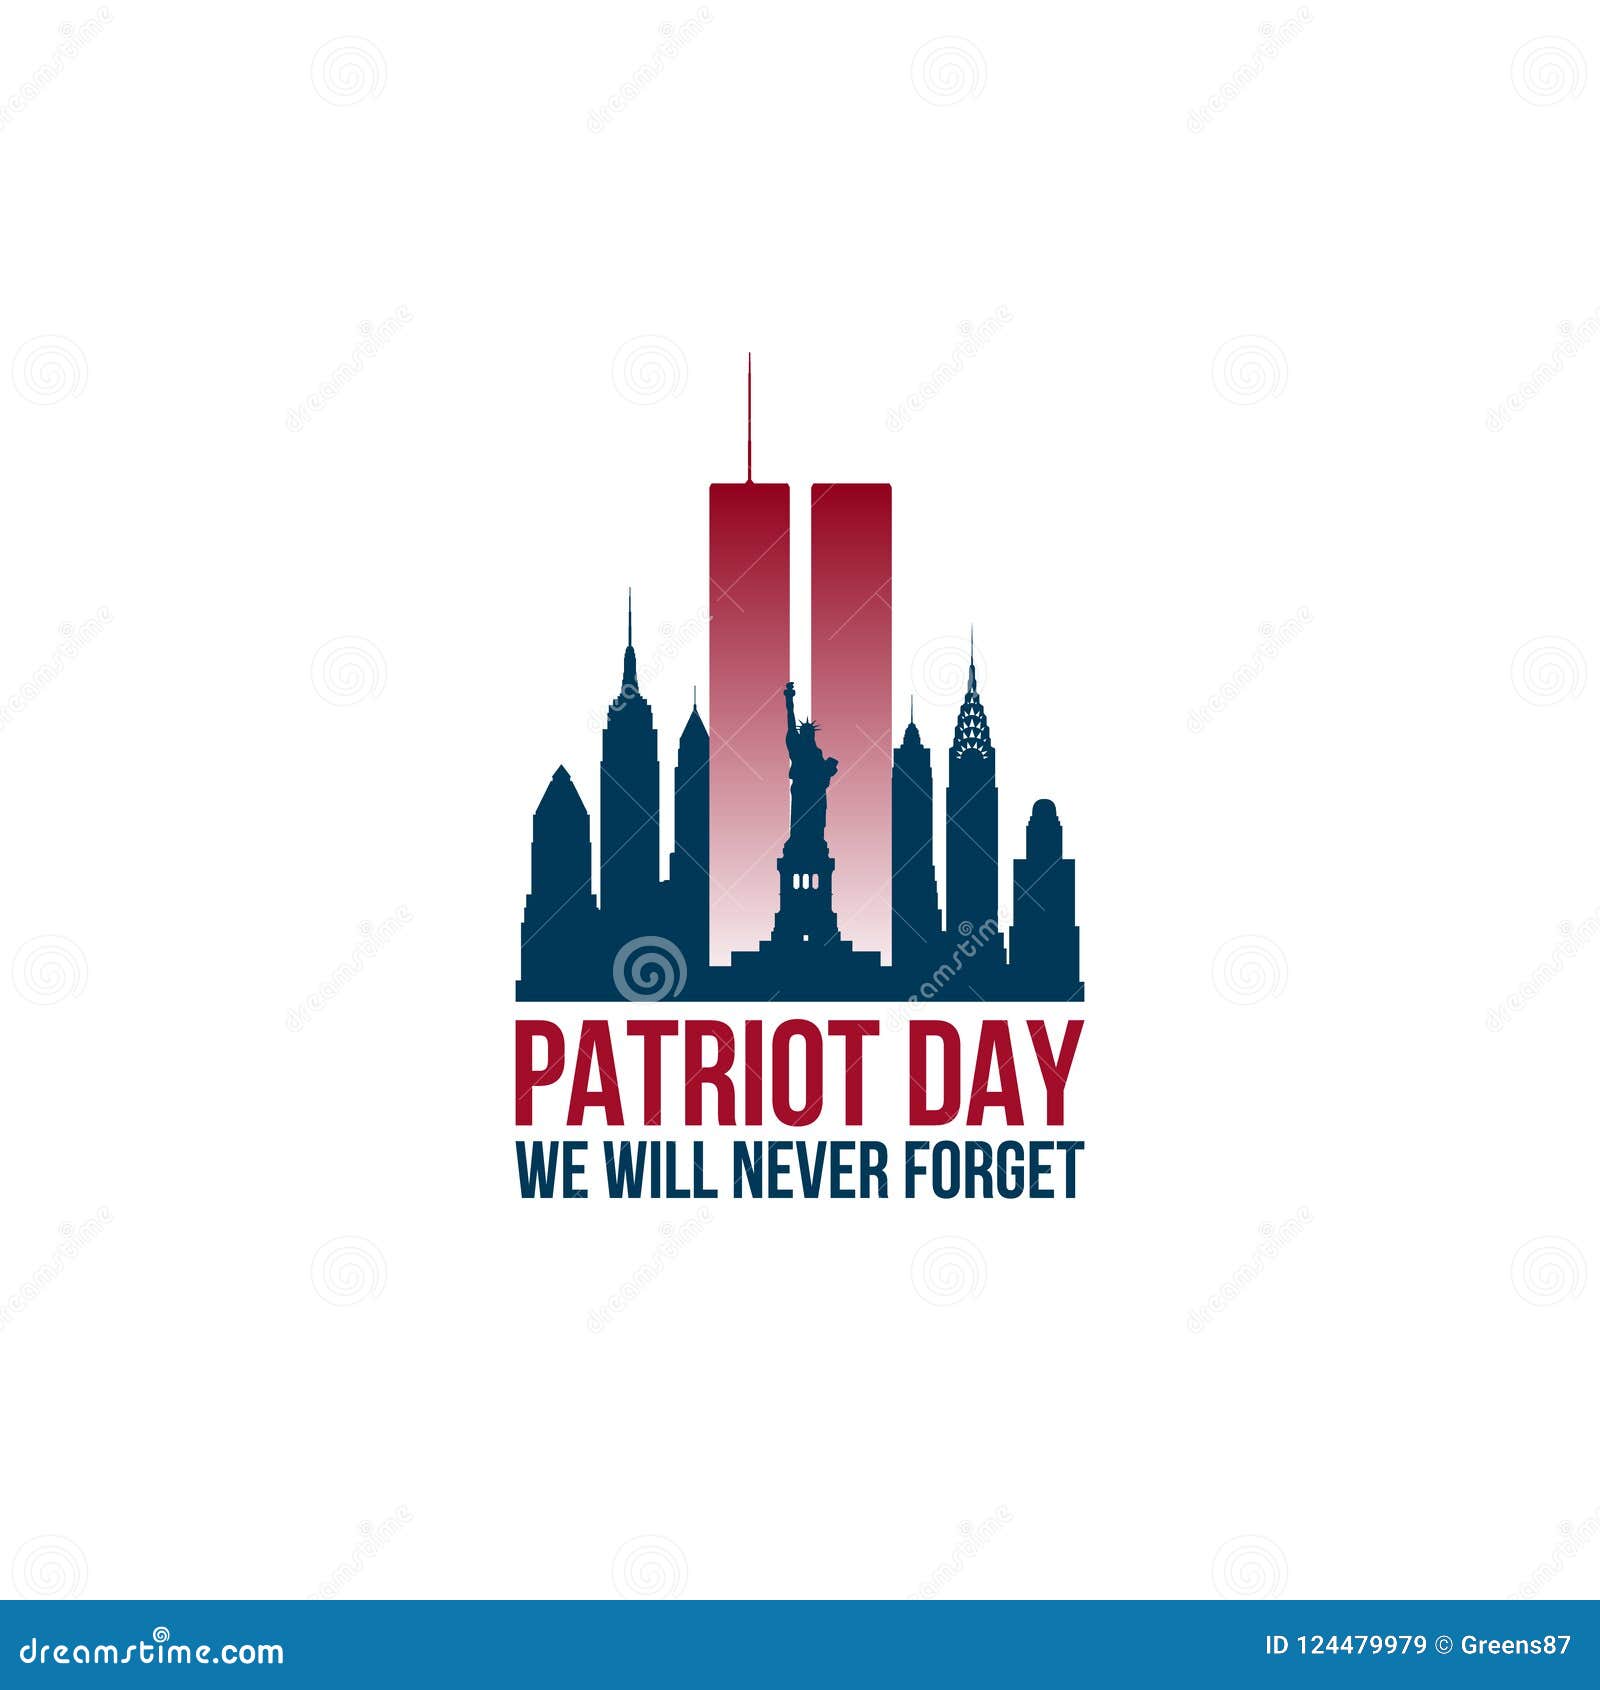 patriot day card with twin towers and phrase we will never forget.